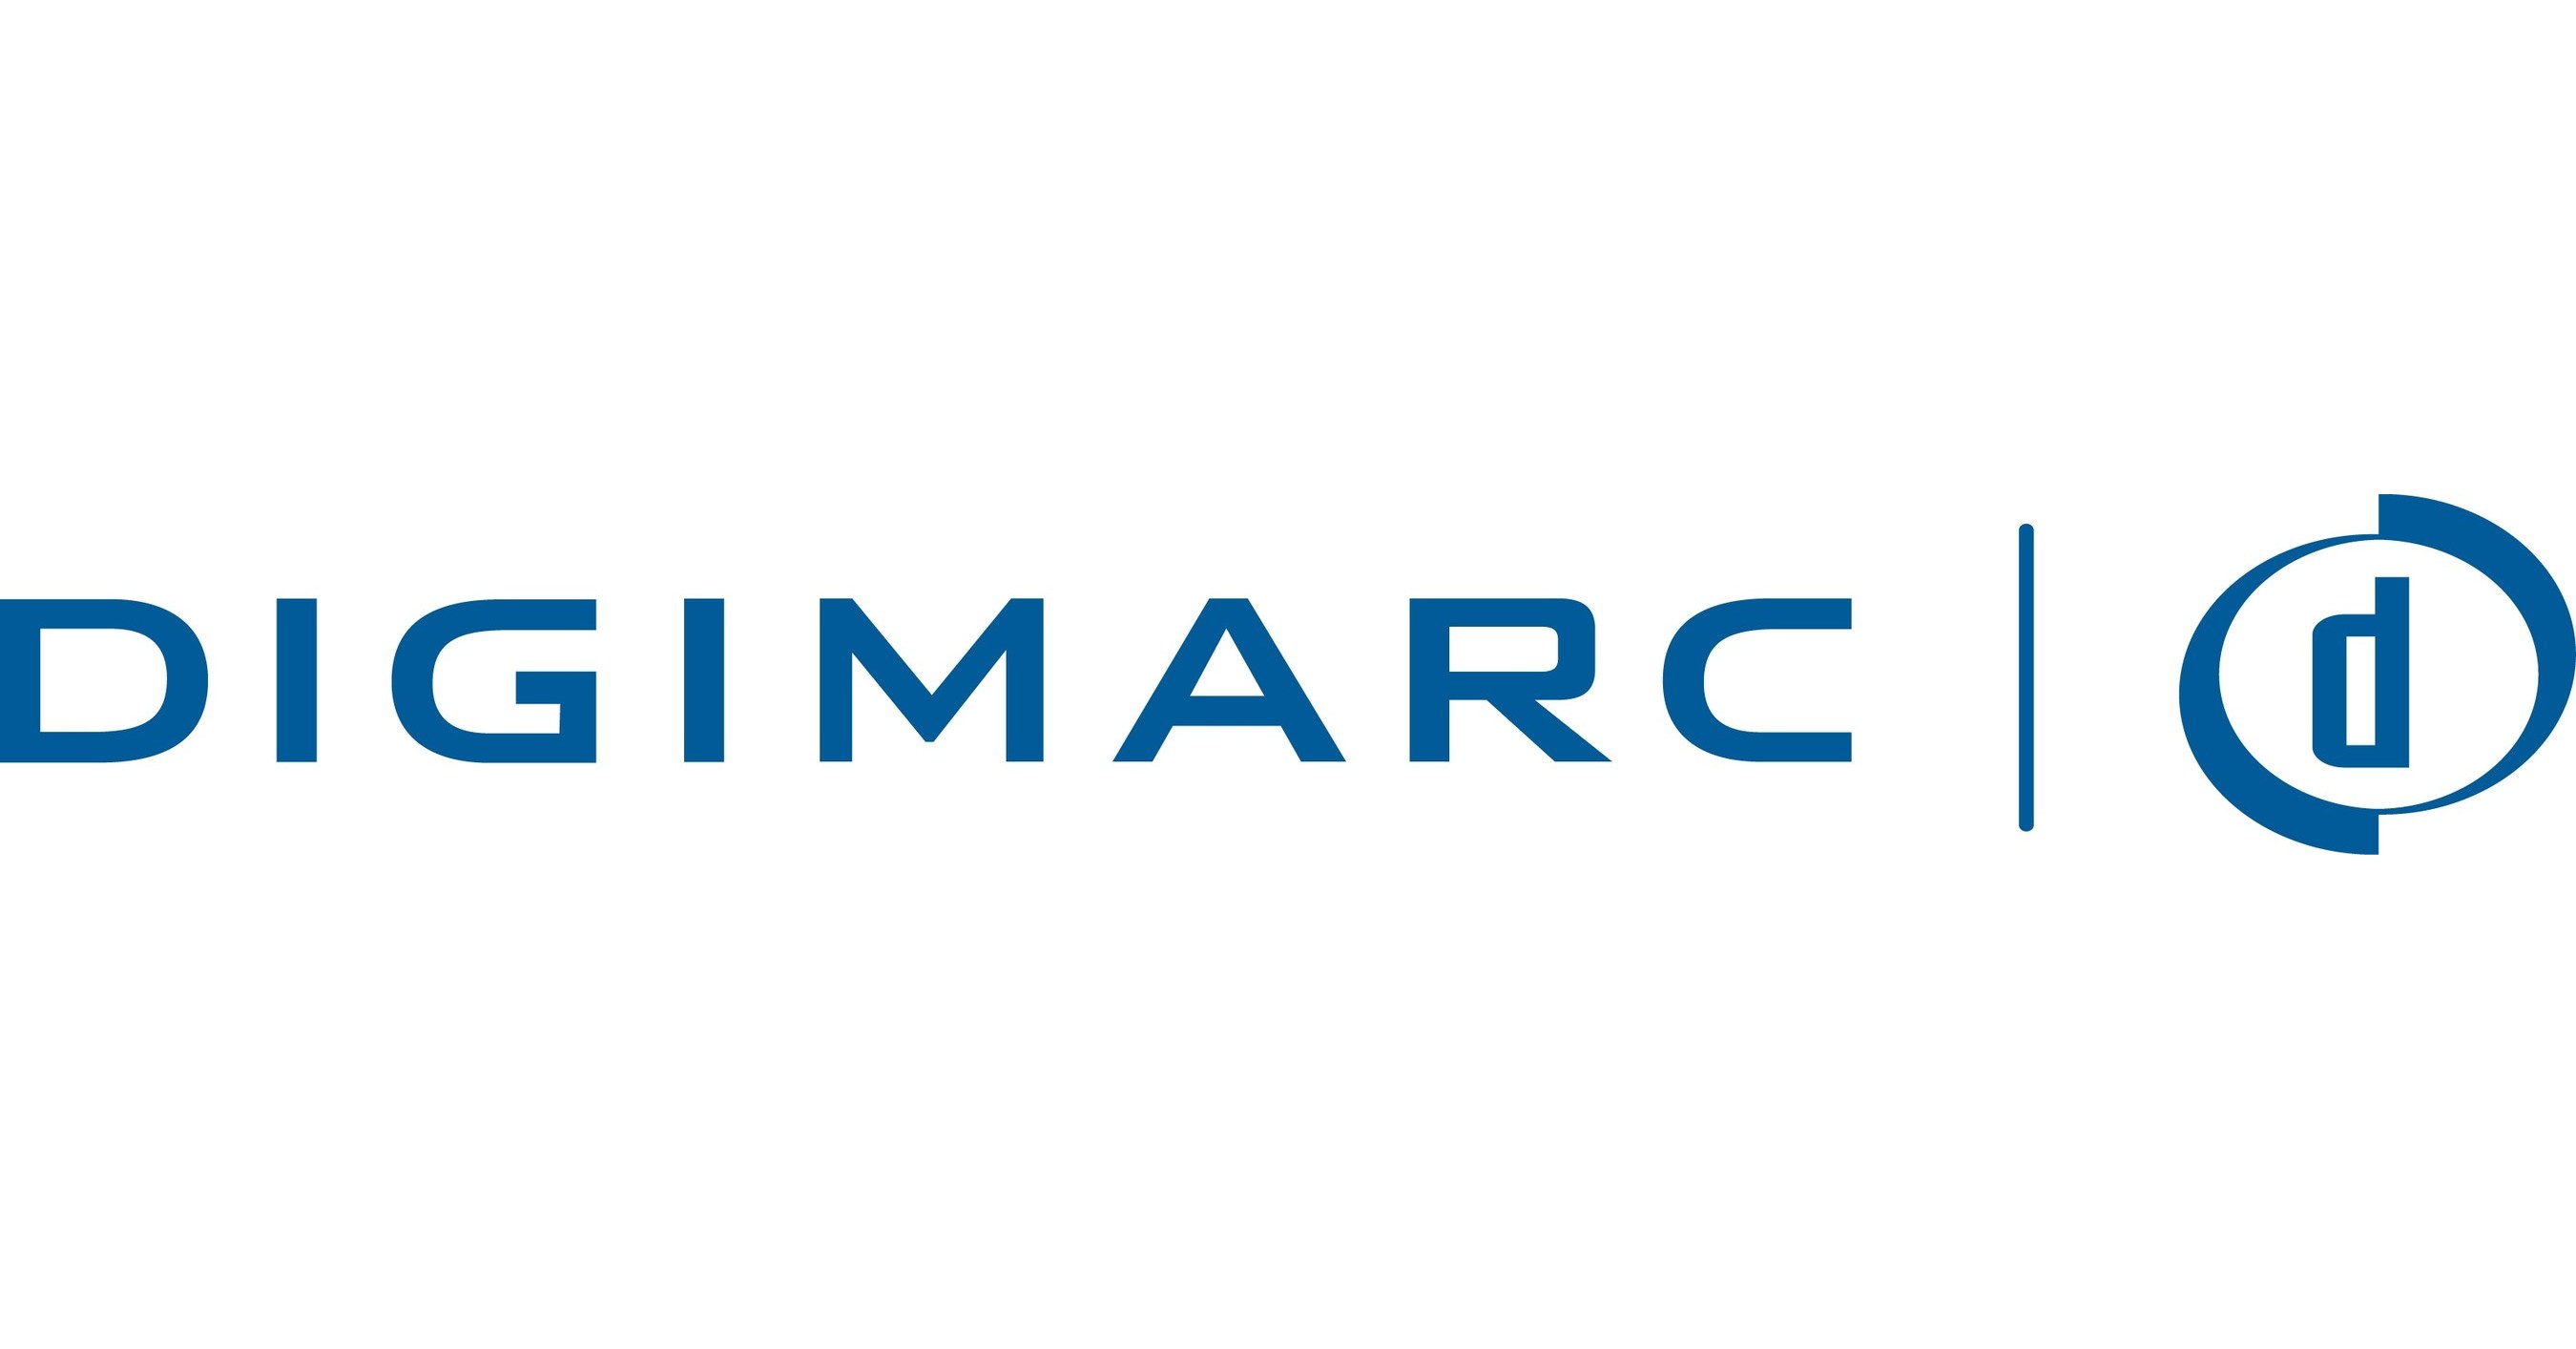 Pre-Media & Package Executive Scott Wilcox Joins Digimarc as VP of Client Services - PR Newswire (press release)